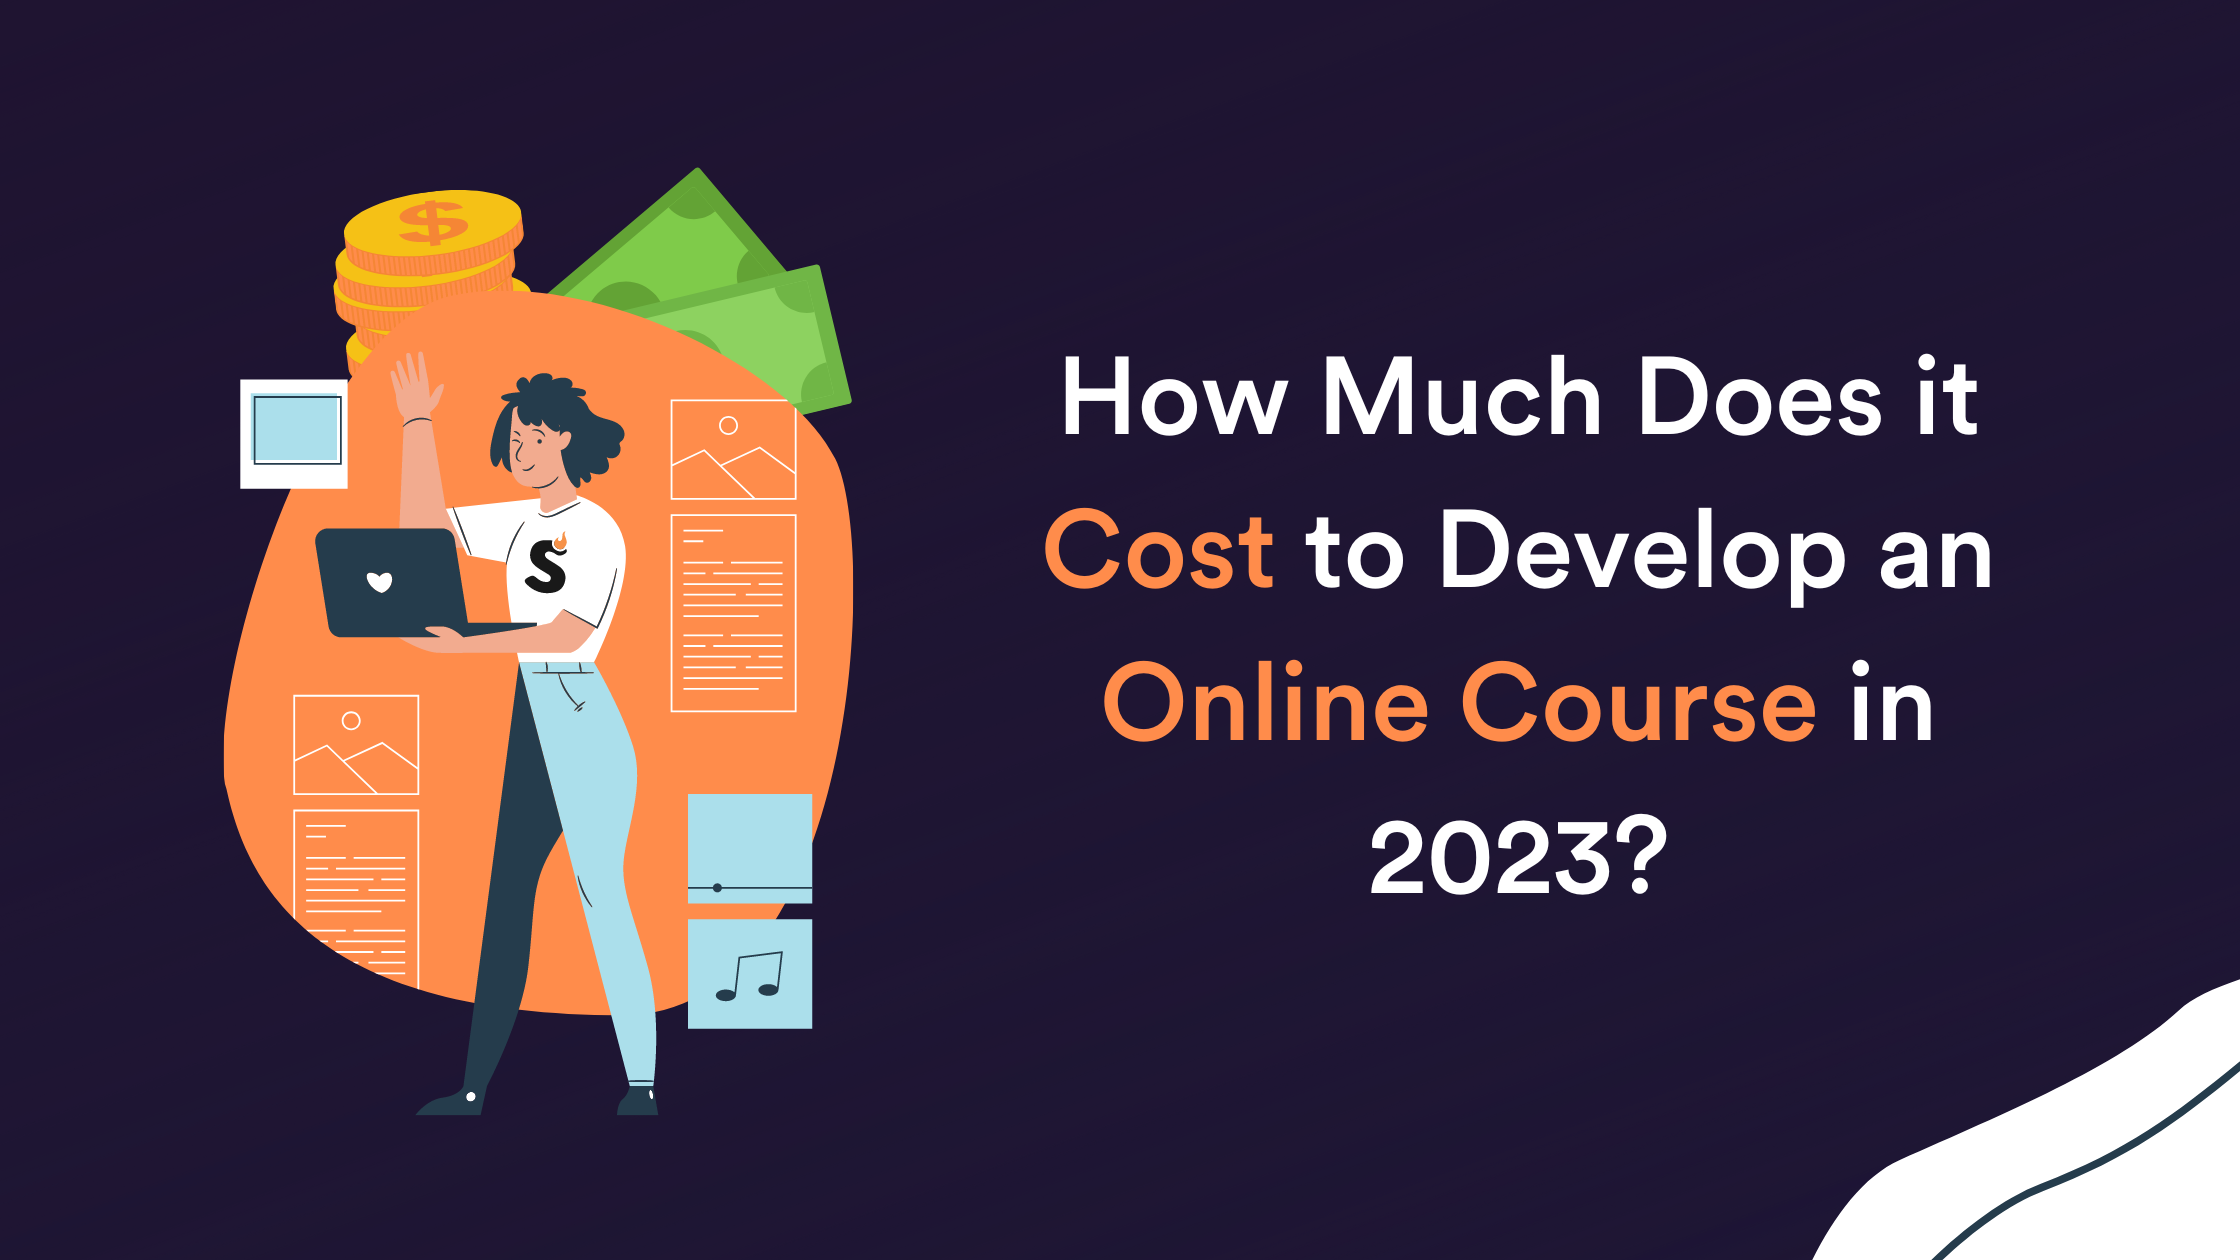 How Much Does it Cost to Develop an Online Course in 2023?